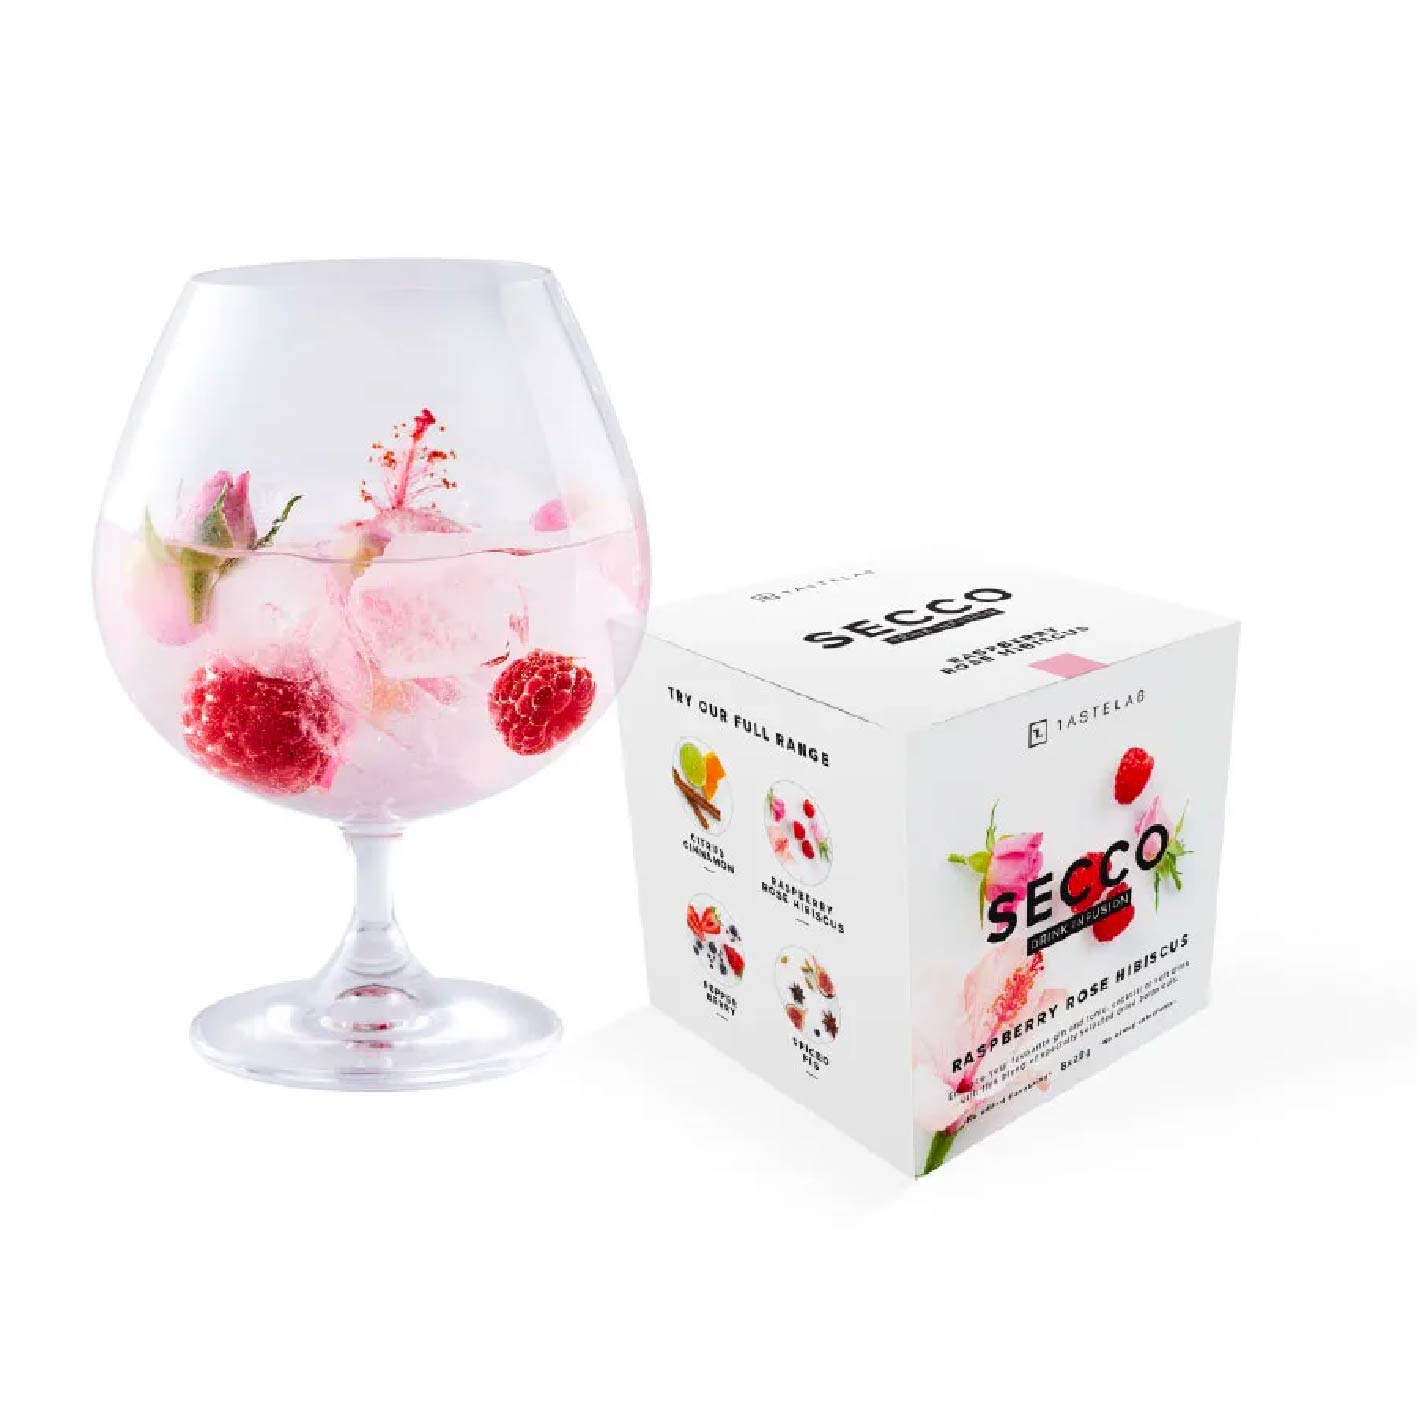 Tastelab – Secco Drink Infusion, Raspberry Rose Hibiscus 8 Sachets Per